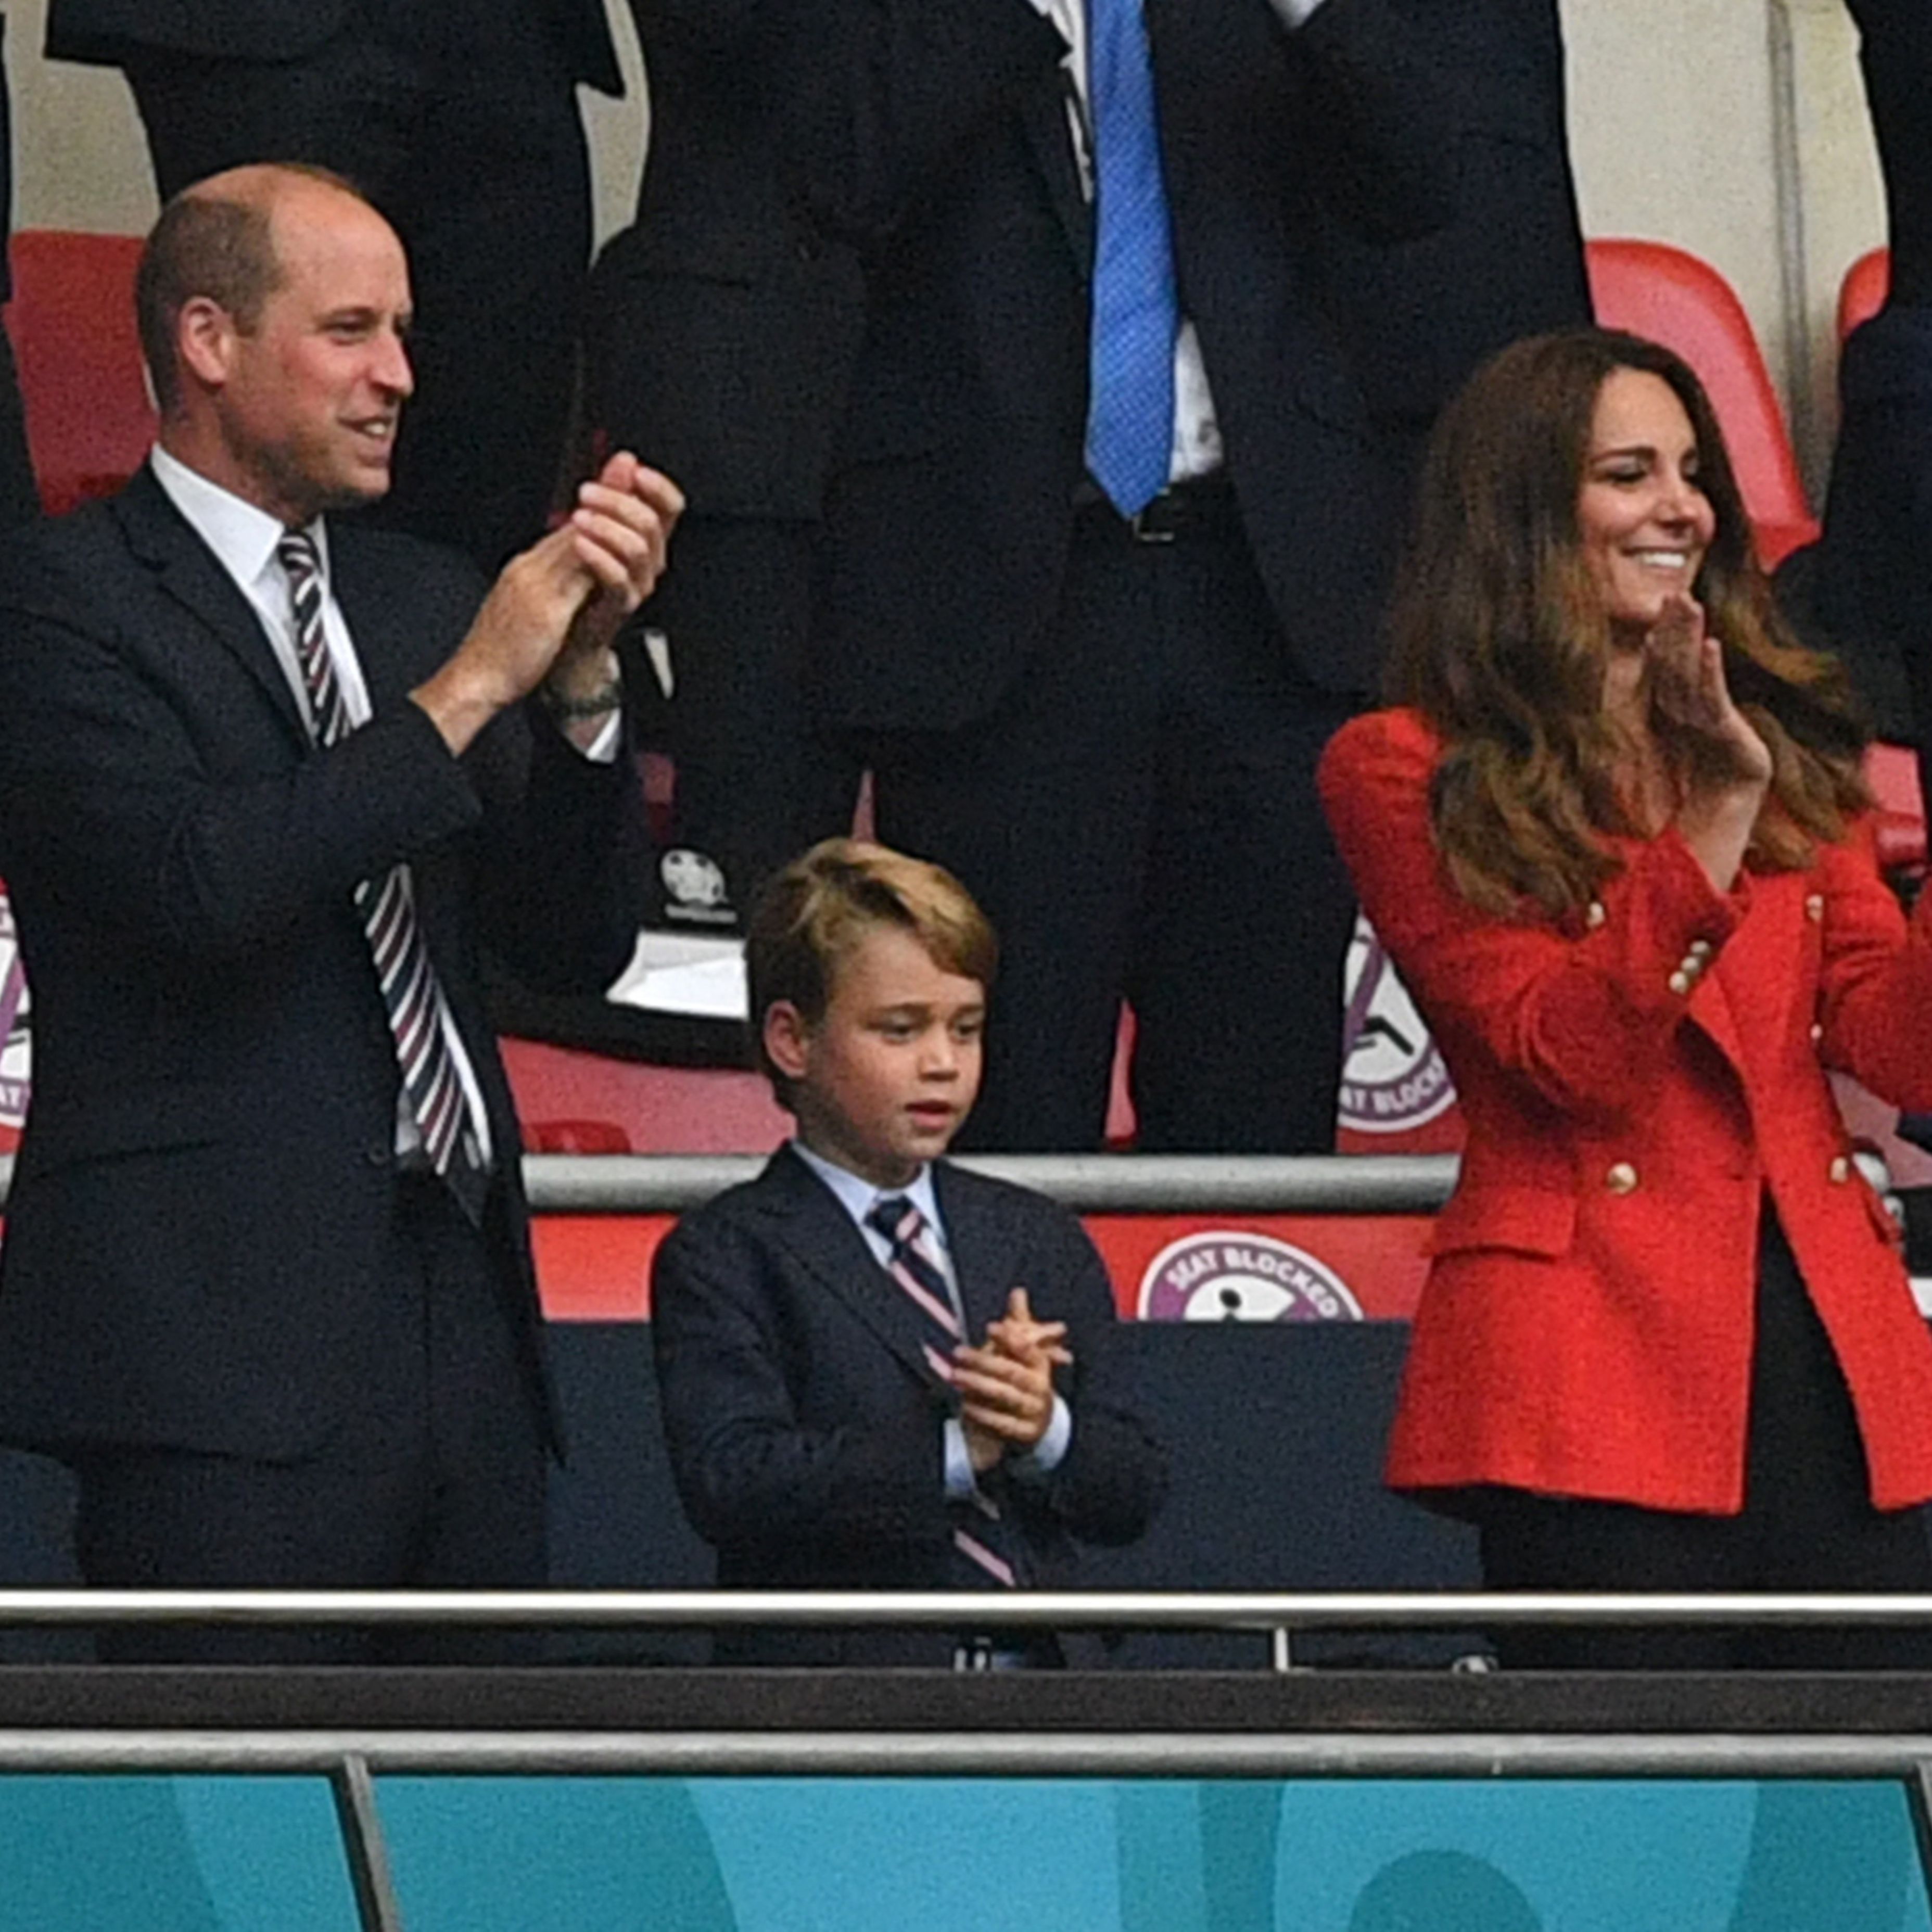 Kate Middleton Is Using Subtle Fashion Cues to Prep Prince George to Be King